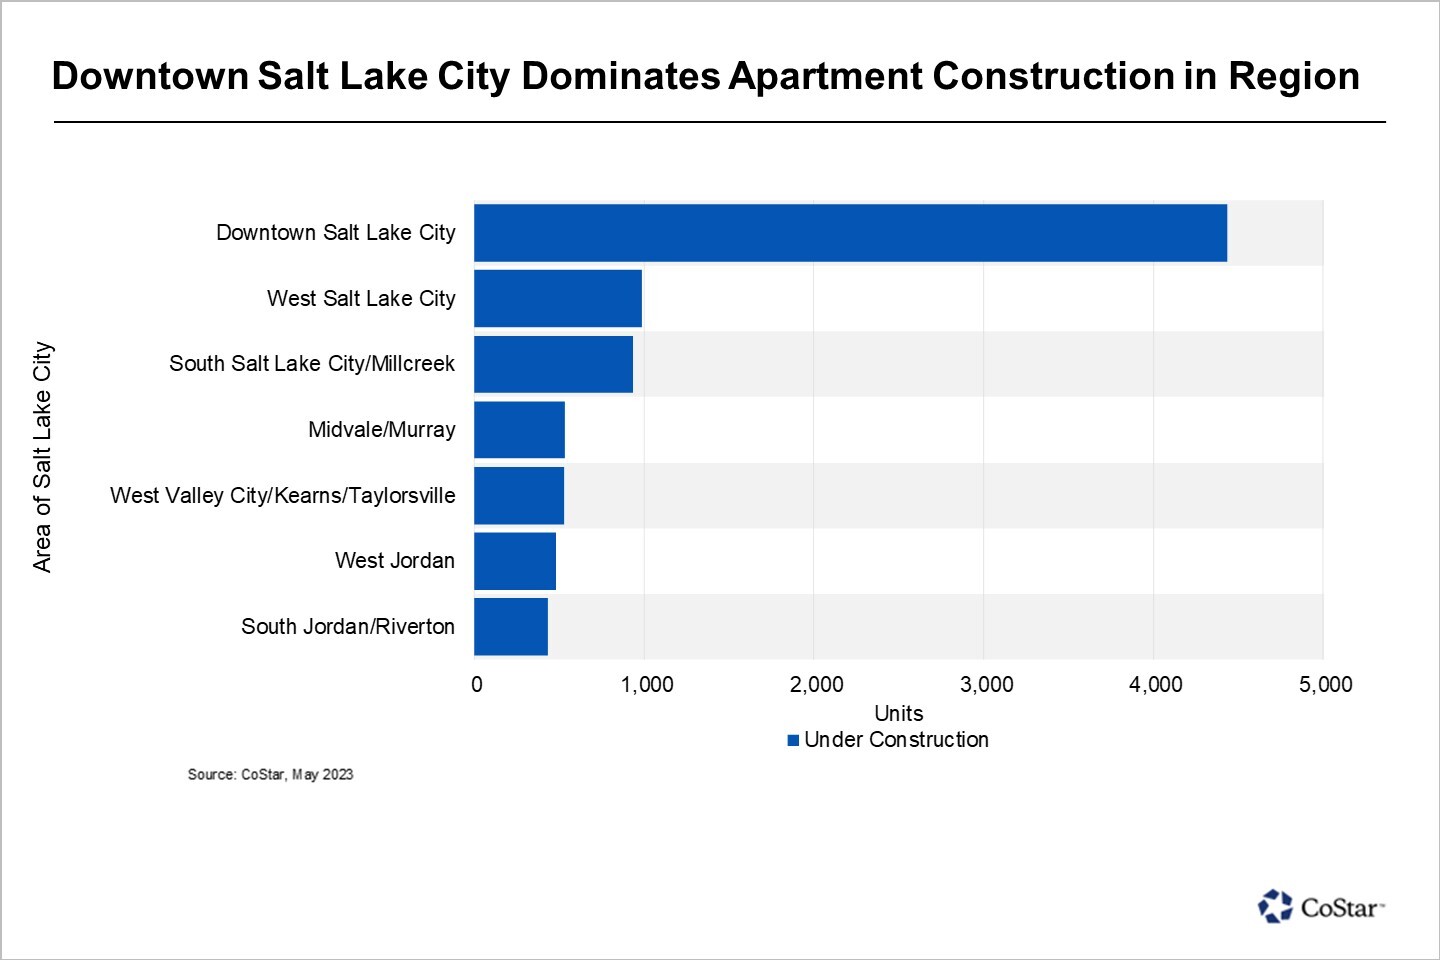 Nearly 4,500 units are under construction in Downtown Salt Lake City.